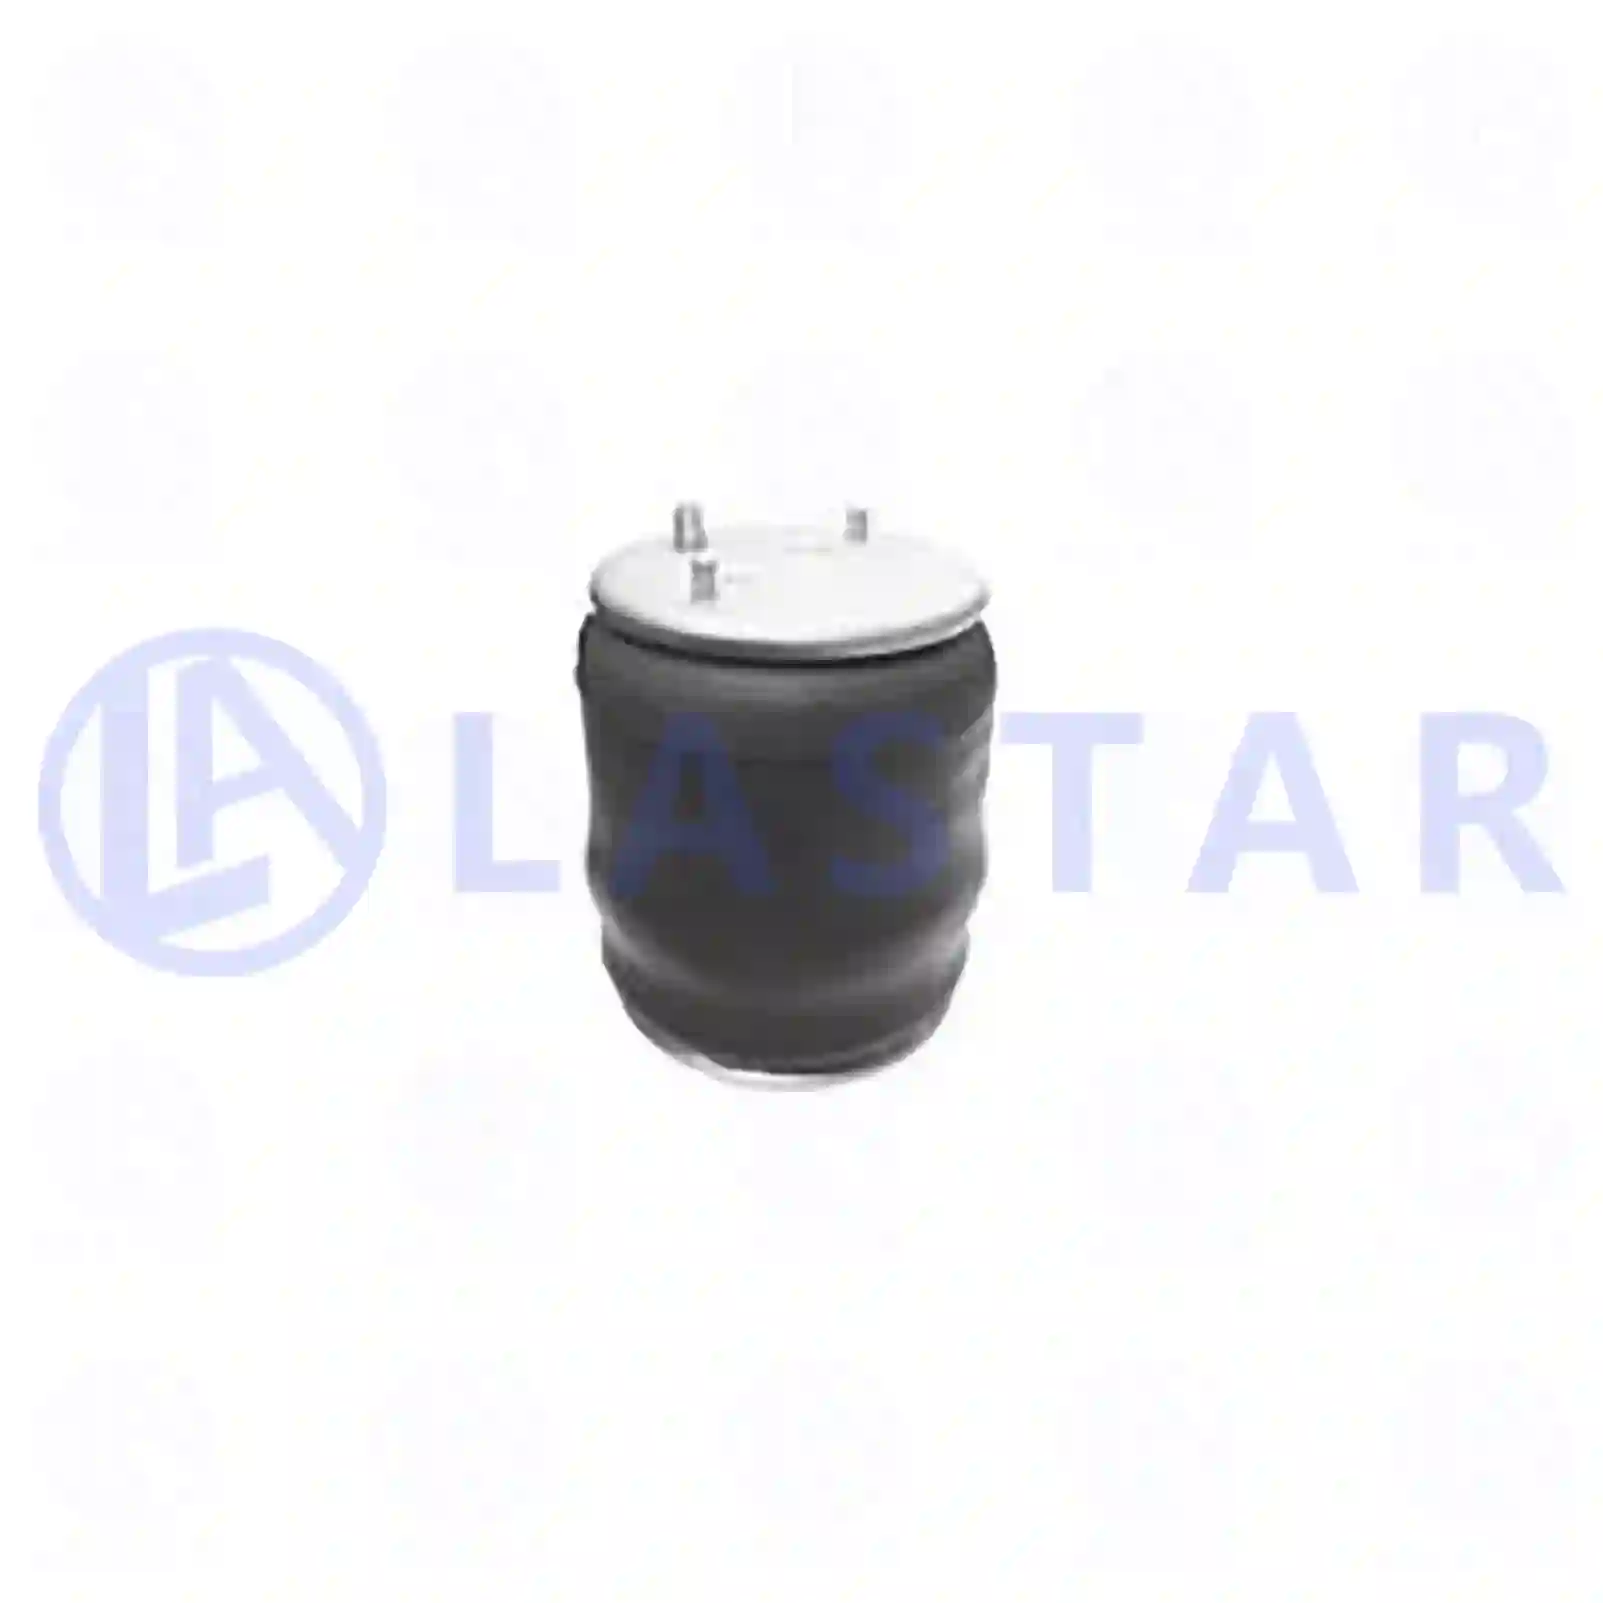 Air spring, with steel piston, 77730057, MLF7146, 1362145, 1370743, 1386199, ZG40731-0008 ||  77730057 Lastar Spare Part | Truck Spare Parts, Auotomotive Spare Parts Air spring, with steel piston, 77730057, MLF7146, 1362145, 1370743, 1386199, ZG40731-0008 ||  77730057 Lastar Spare Part | Truck Spare Parts, Auotomotive Spare Parts